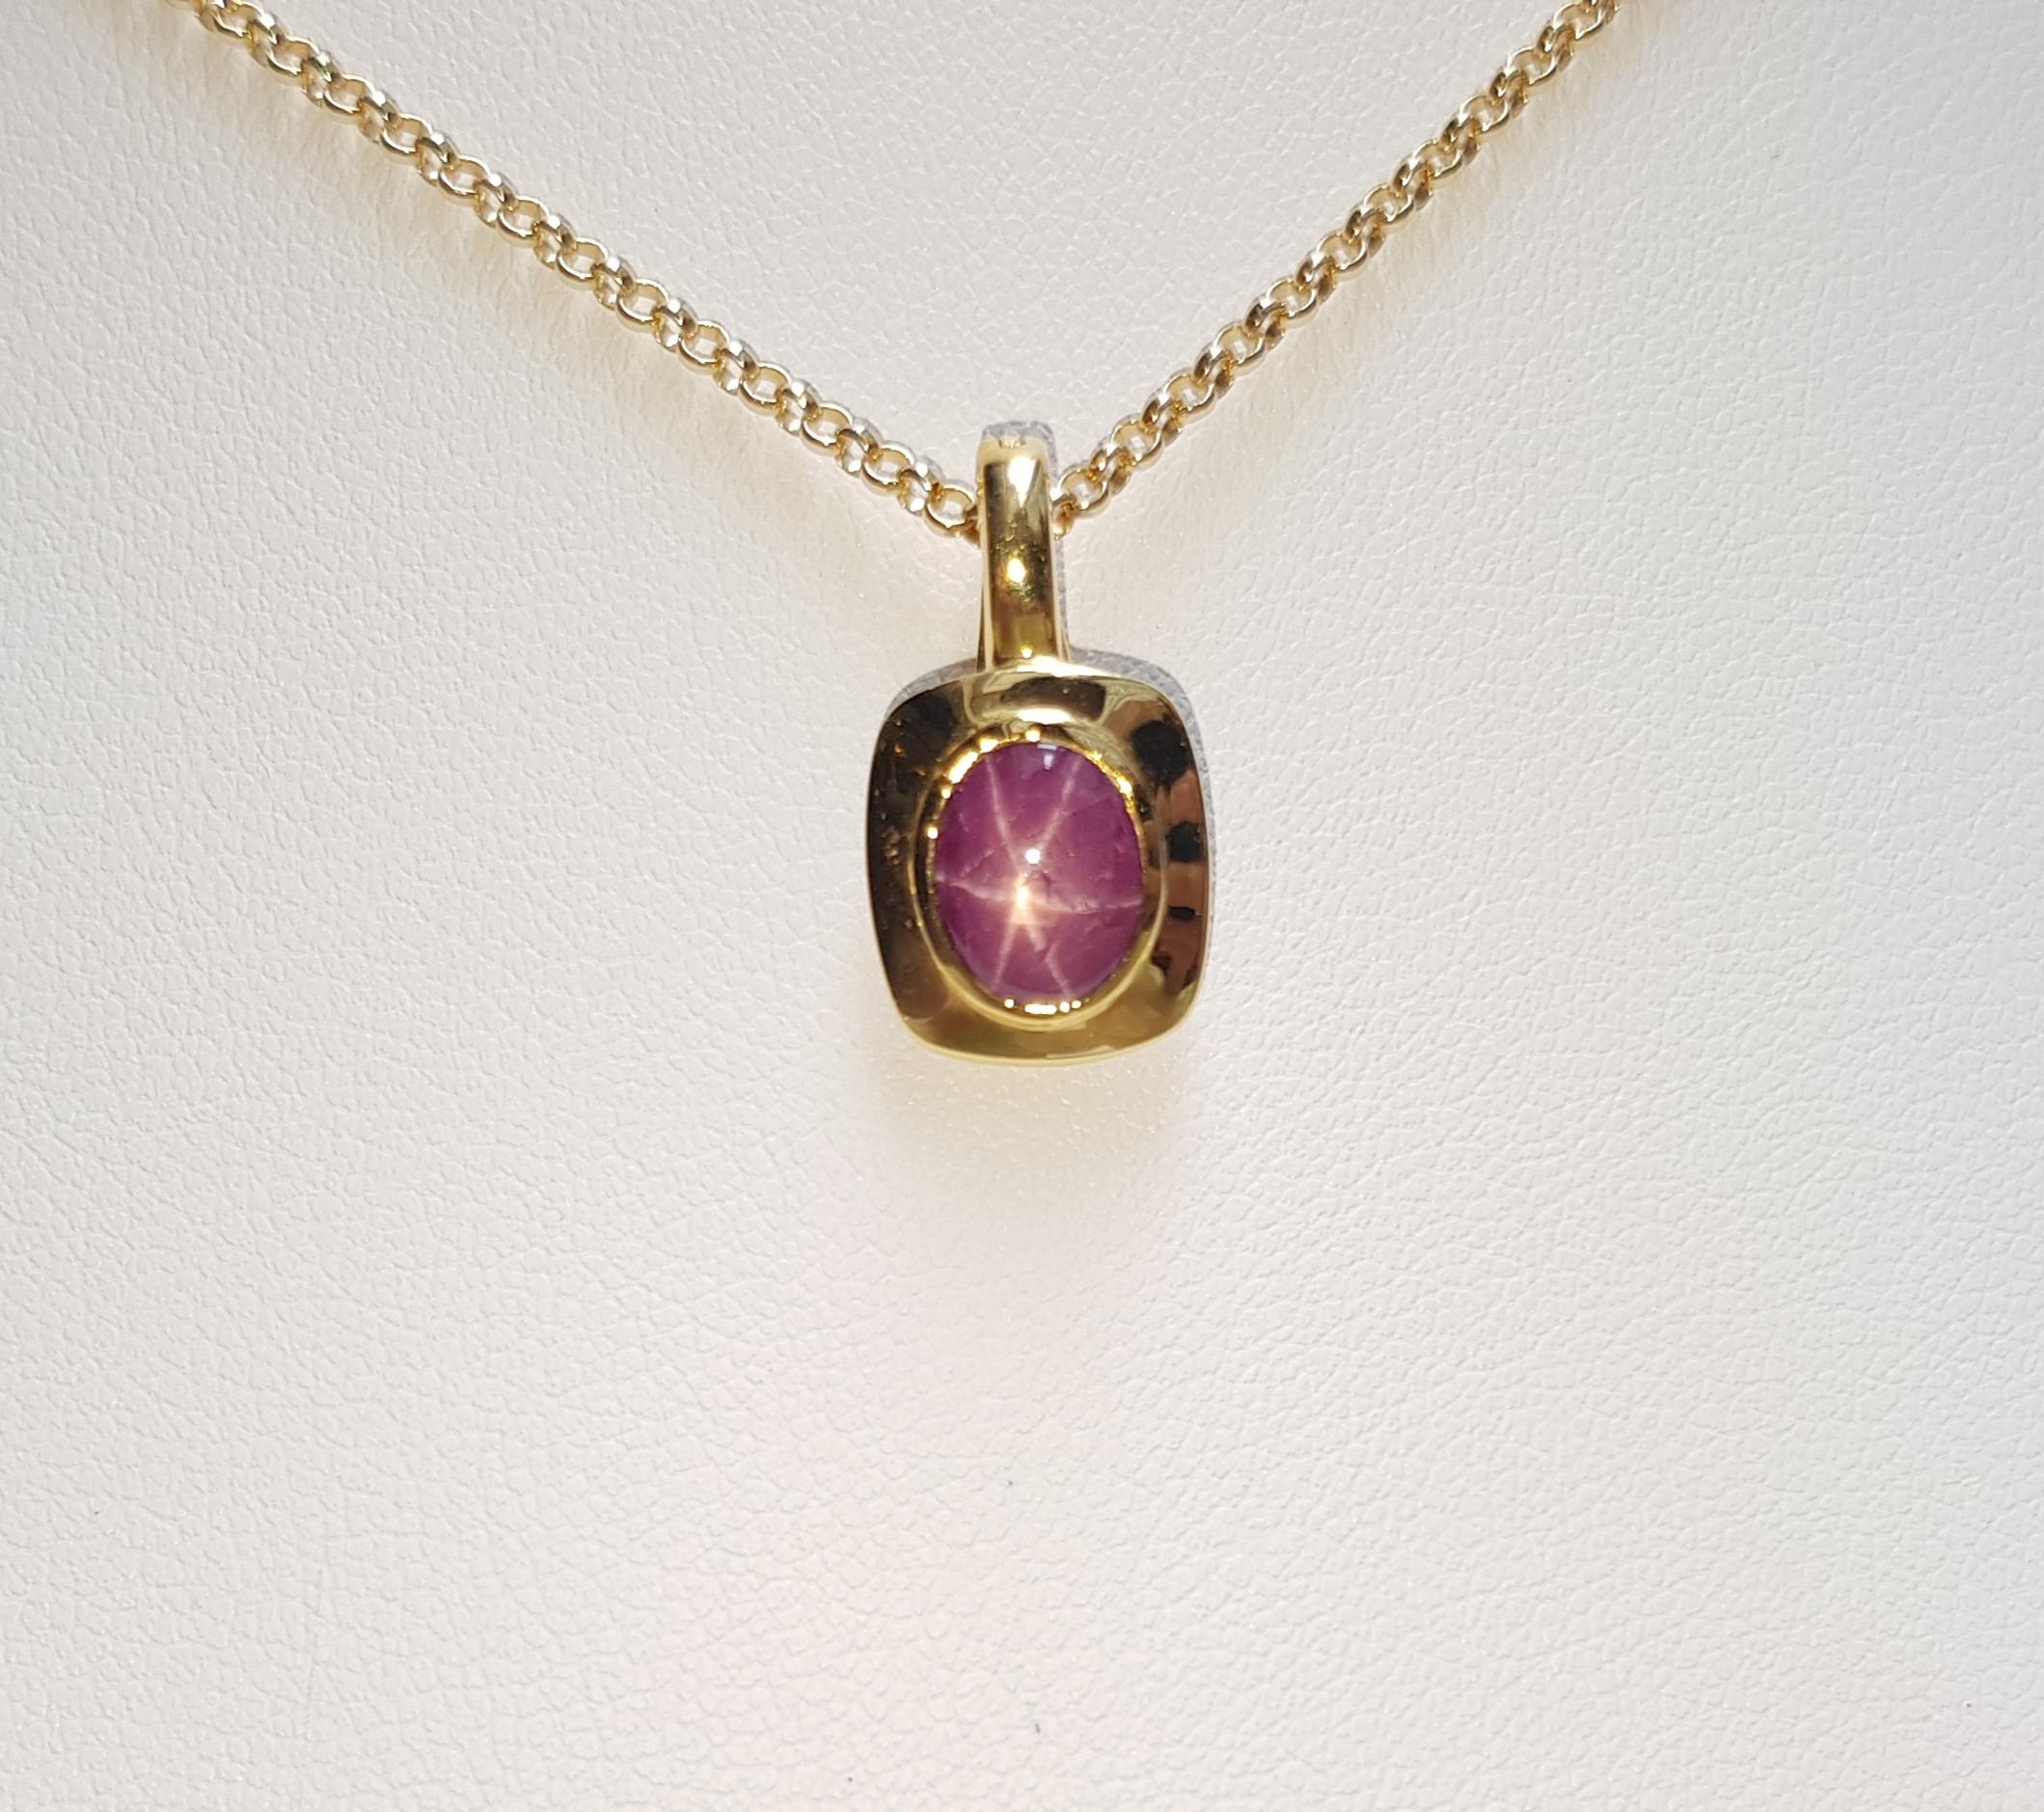 Star Ruby 2.58 carats Pendant set in 18 Karat Gold Settings
(chain not included)

Width:  1.0 cm 
Length: 1.8 cm
Total Weight: 3.09 grams

